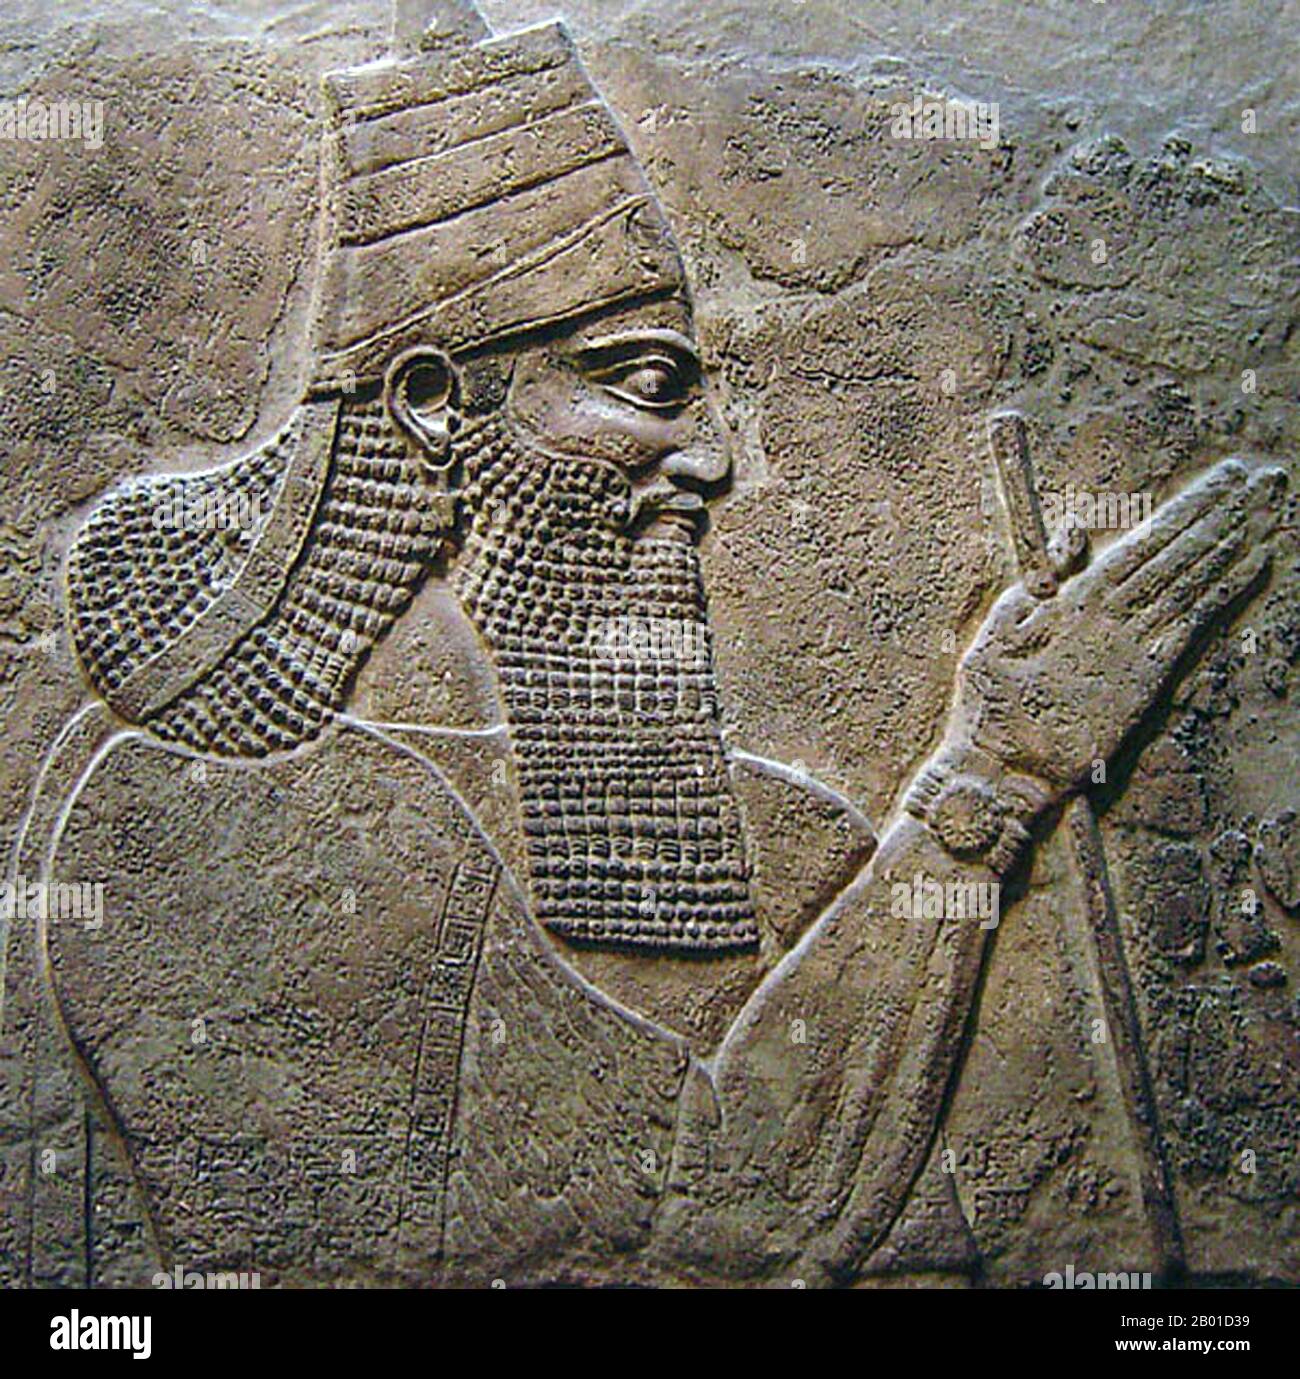 Iraq: Tiglath-Pileser III, King of Assyria (c. 795-727 BCE). Gypsum wall panel relief, 728 BCE.  Tiglath-Pileser III  was a prominent king of Assyria in the eighth century BCE (r. 745-727 BCE), and is widely regarded as the founder of the Neo-Assyrian Empire.  Tiglath-Pileser III seized the Assyrian throne during a civil war and killed the royal family. He made sweeping changes to the Assyrian government, considerably improving its efficiency and security. Assyrian forces became a standing army. He is considered to be one of the most successful military commanders in world history. Stock Photo